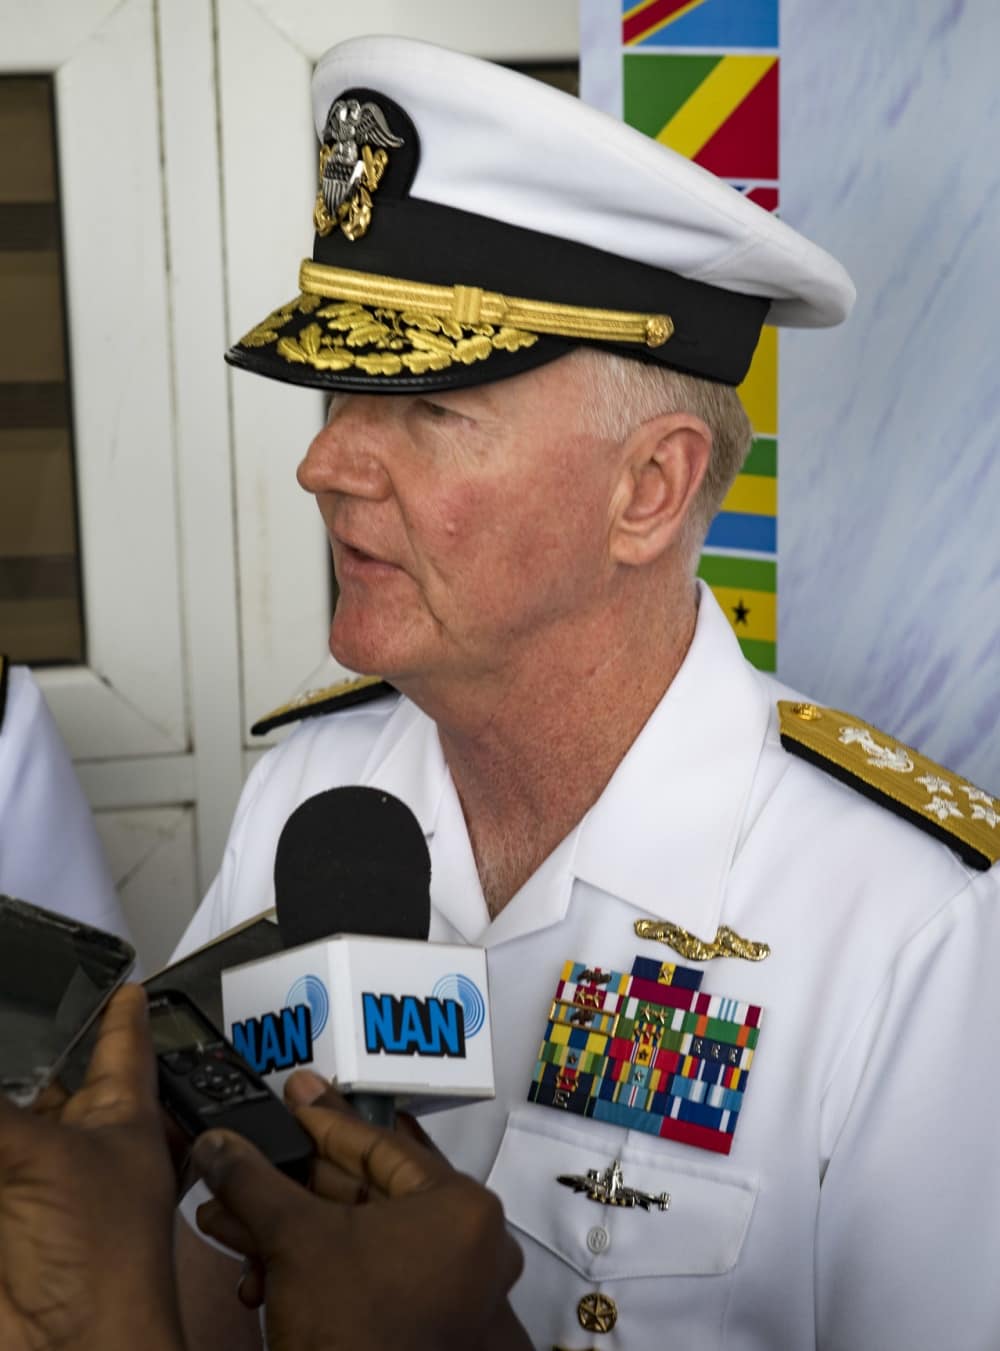 Photo By Petty Officer 1st Class Kyle Steckler | 190322-N-RG482-0429 LAGOS, Nigeria (March 22, 2019) Adm. James G. Foggo III, commander of U.S. Naval Forces Europe-Africa and Allied Joint Force Command Naples, Italy, speaks at a press conference after the closing ceremony of exercise Obangame Express 2019 in Lagos, Nigeria, March 22, 2019. Obangame Express, sponsored by U.S. Africa Command, is designed to improve regional cooperation, maritime domain awareness, information-sharing practices, and tactical interdiction expertise to enhance the collective capabilities of Gulf of Guinea and West African nations to counter sea-based illicit activity. (U.S. Navy photo by Mass Communication Specialist 1st Class Kyle Steckler/Released)